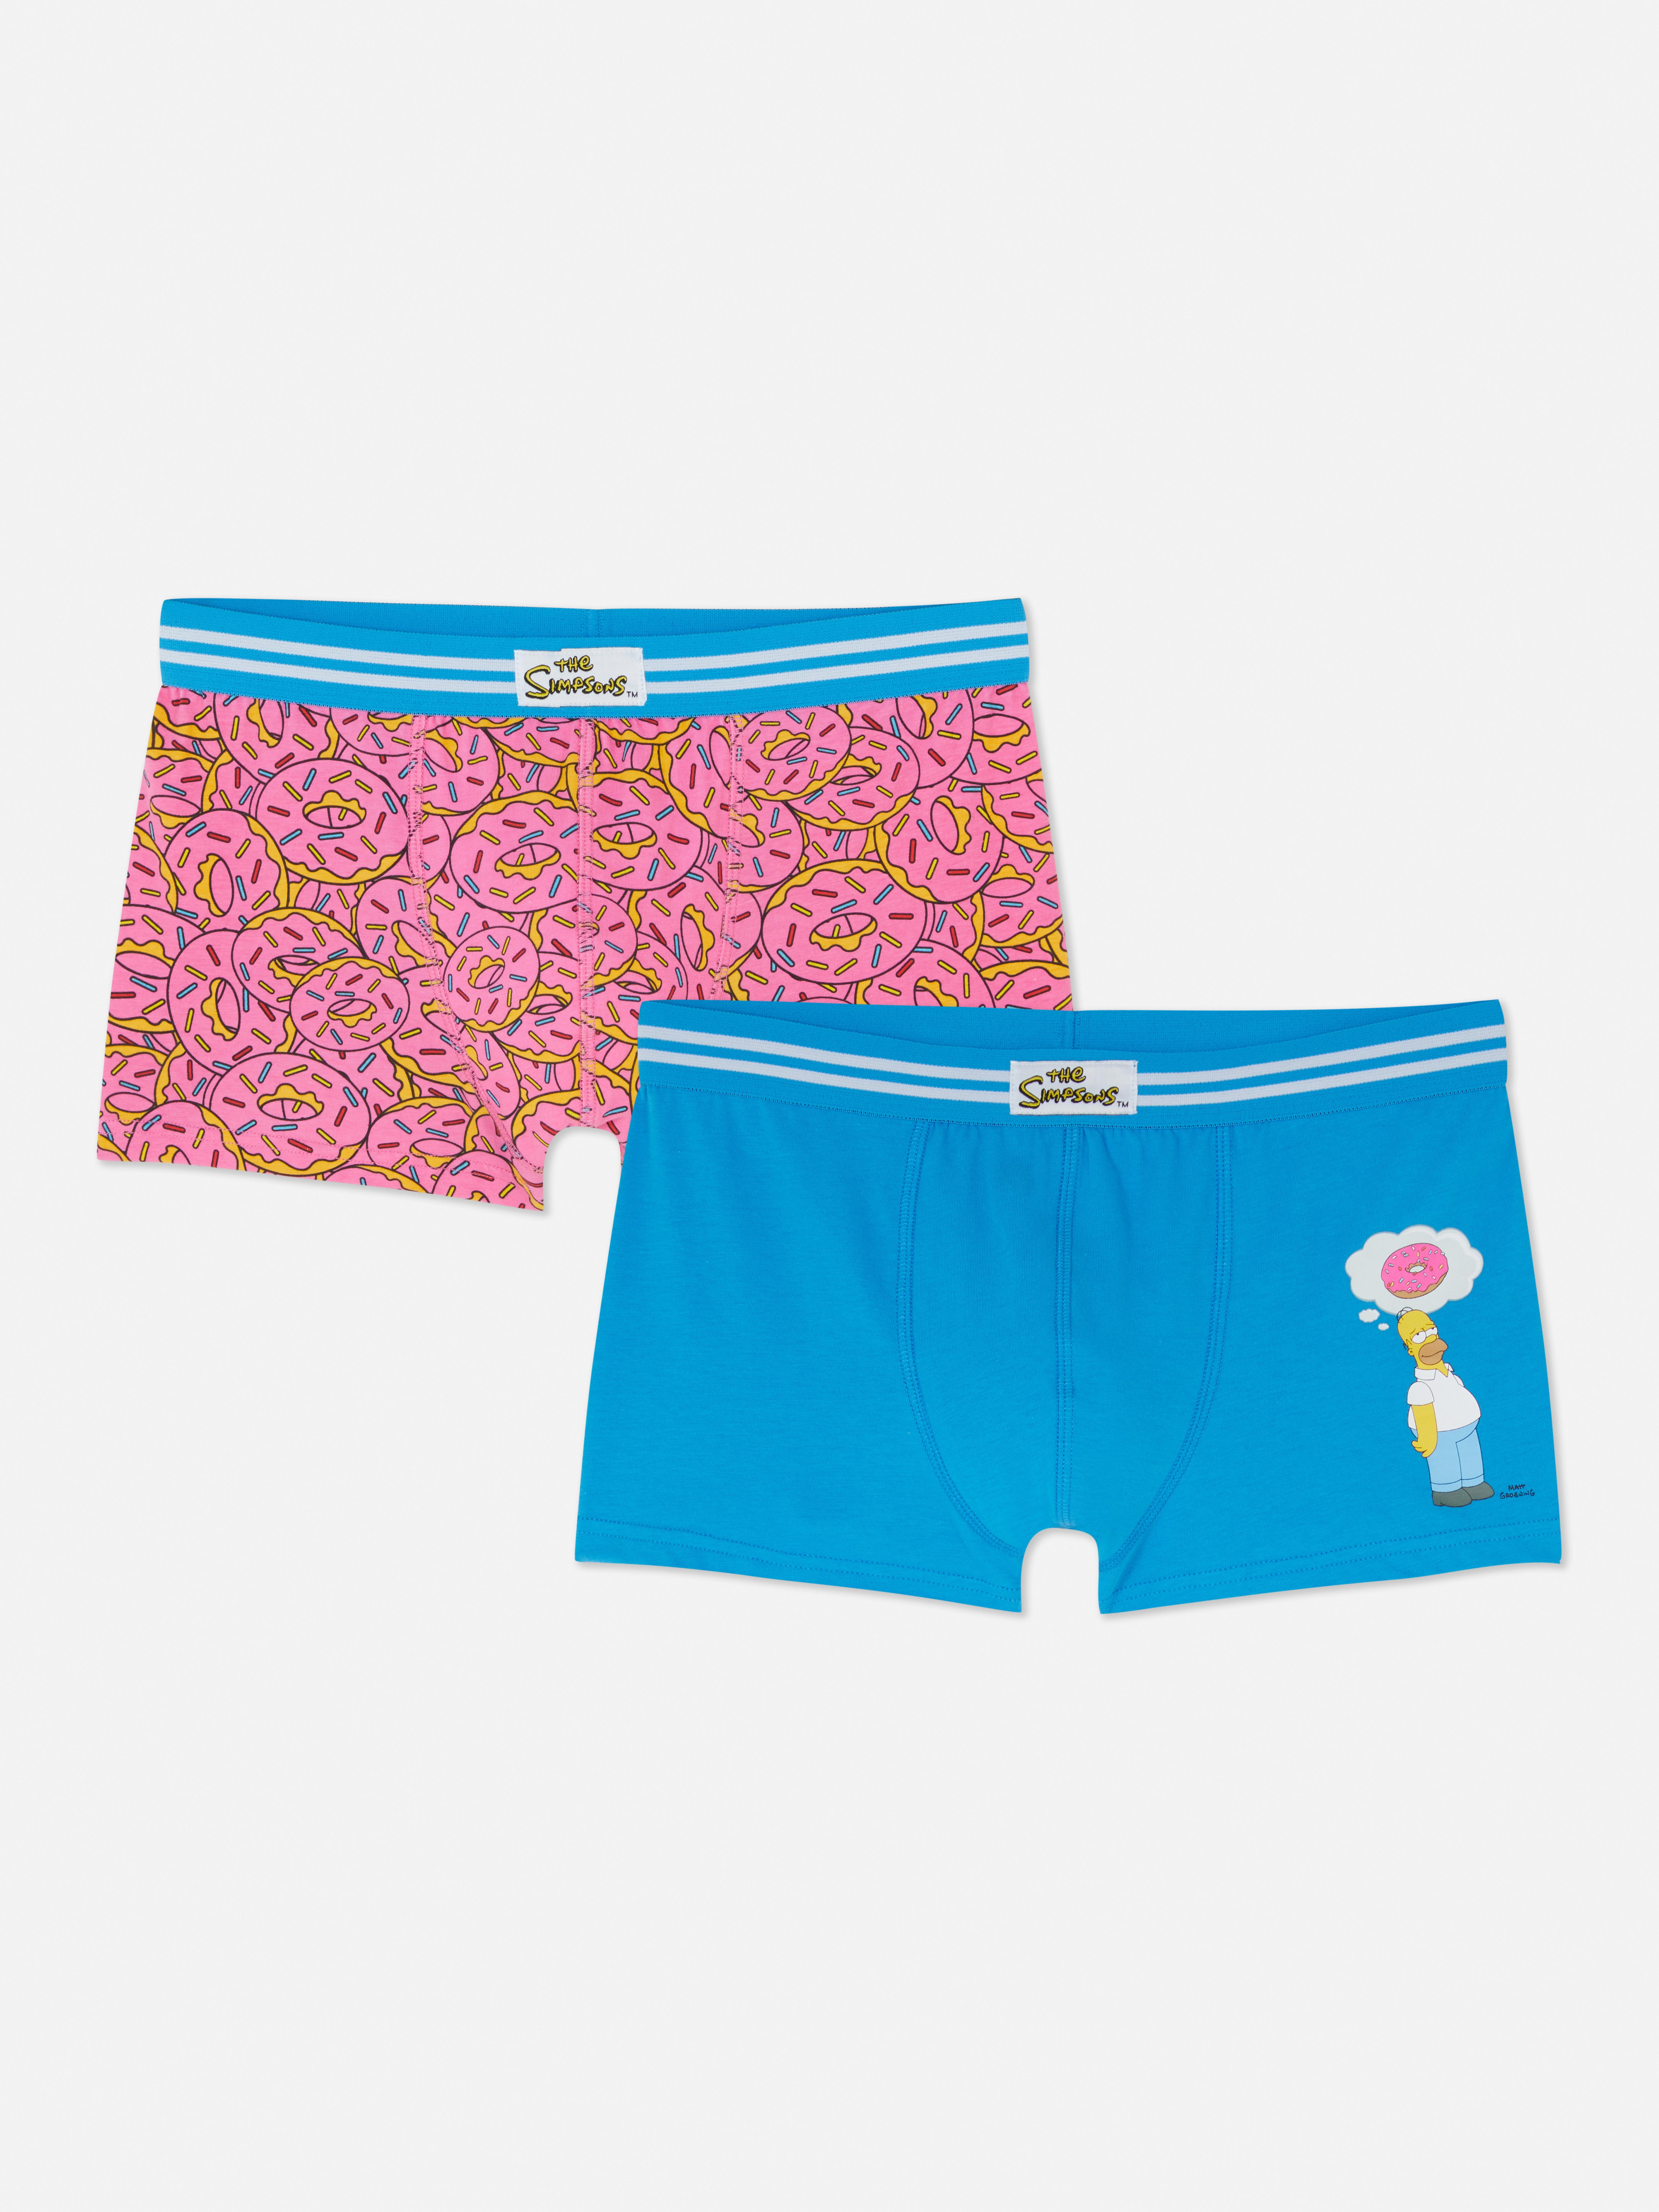 „The Simpsons“ Boxershorts, 2er-Pack